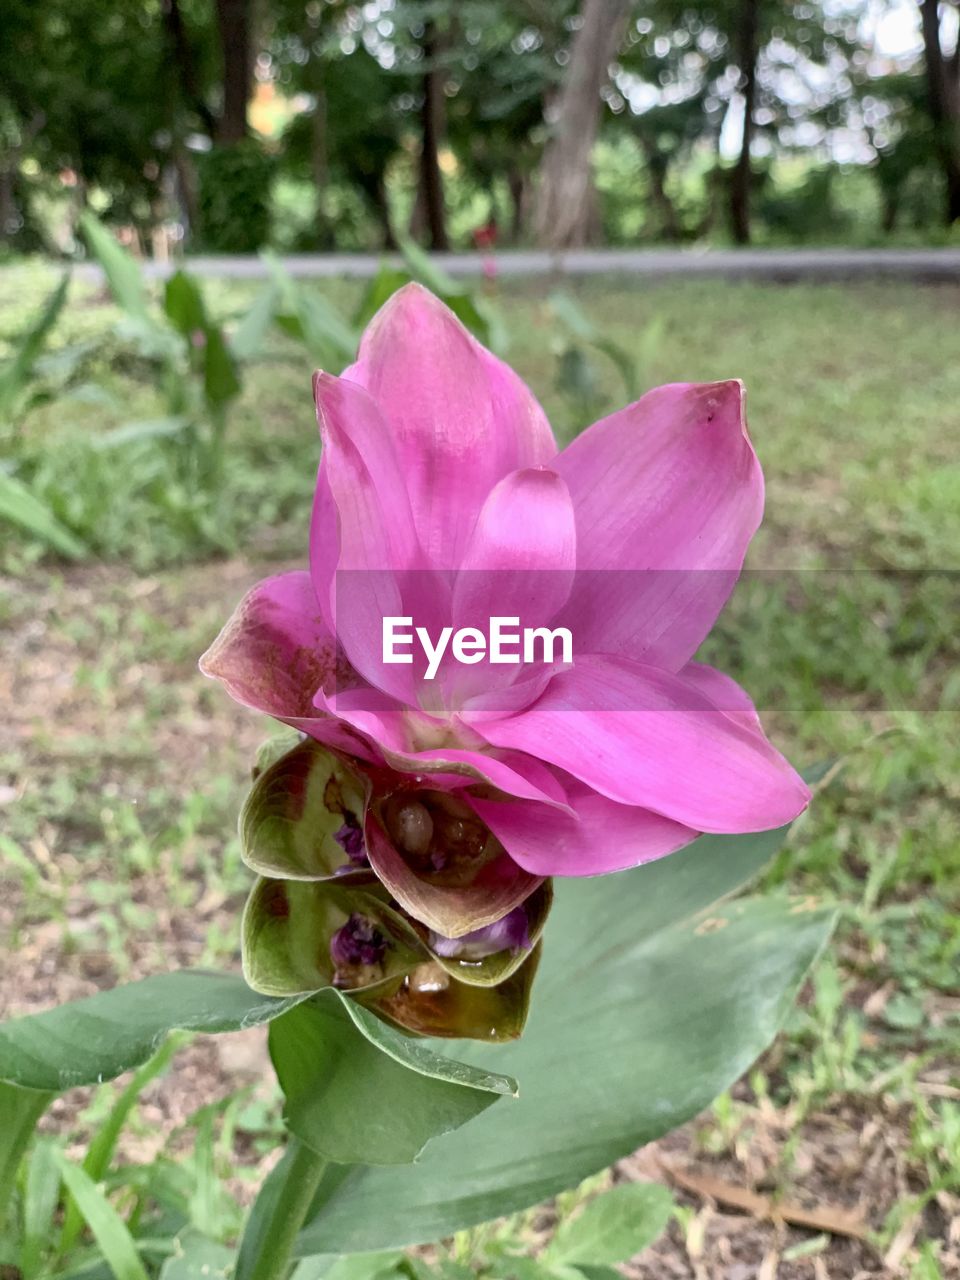 plant, flower, flowering plant, beauty in nature, pink, freshness, growth, petal, nature, close-up, focus on foreground, fragility, inflorescence, flower head, plant part, leaf, day, no people, outdoors, green, tree, land, springtime, pollen